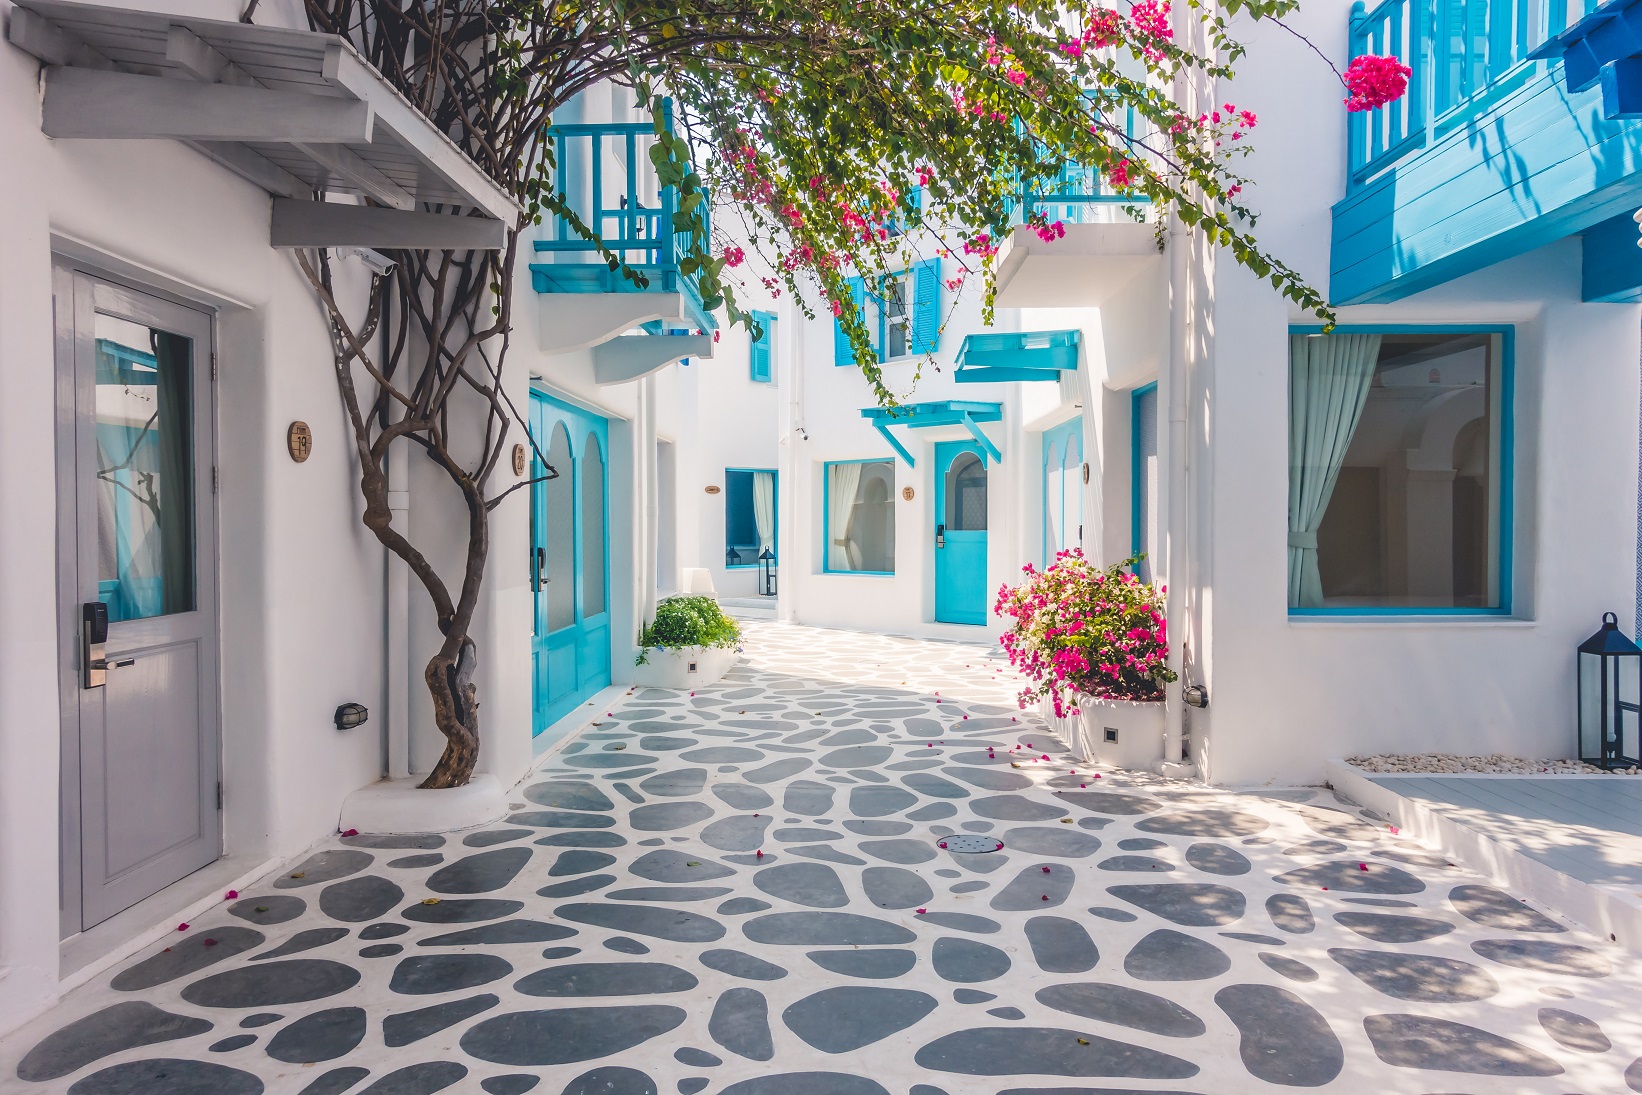 Explore Greece with Unforgettable Holiday Packages